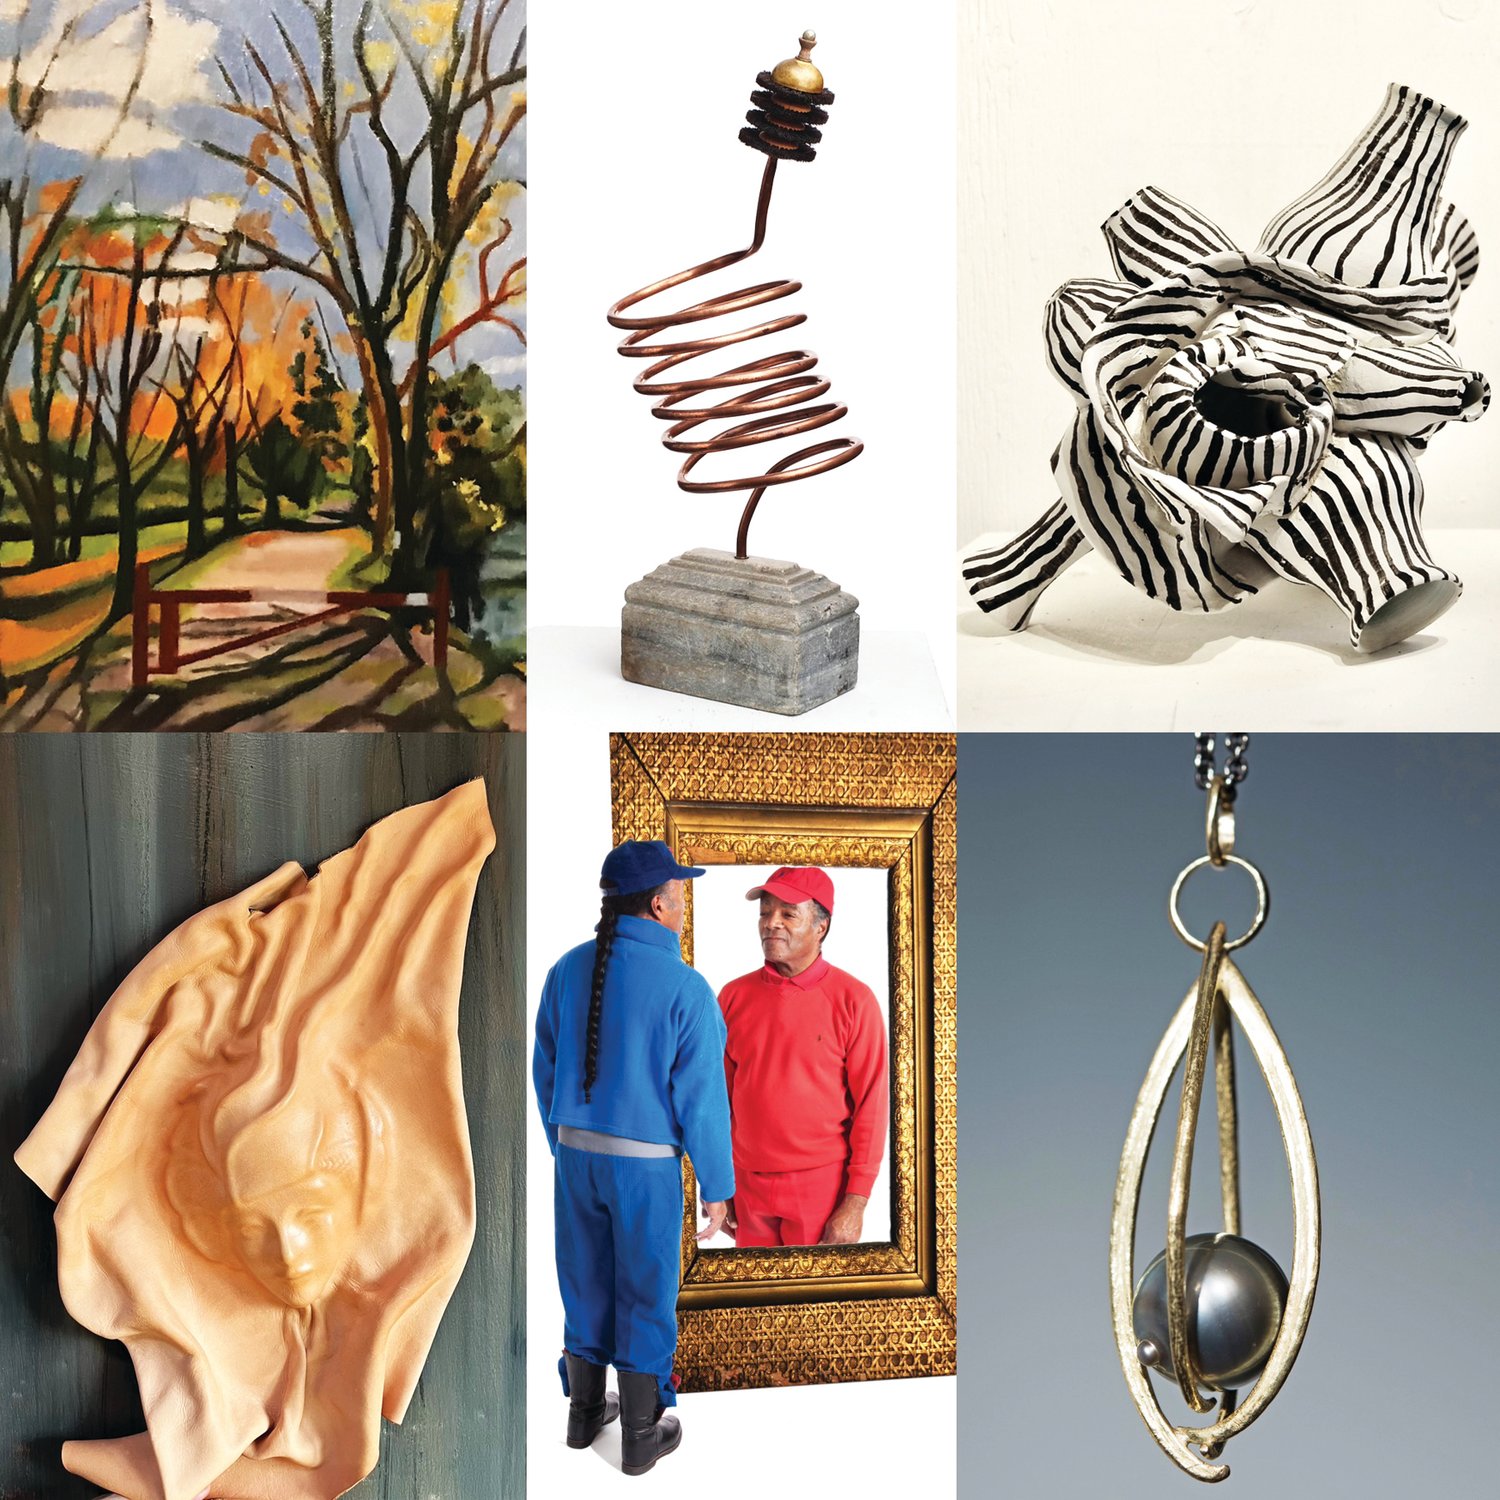 Clockwise from upper left are works by: Eugene Patti, C.T. Bray, Ruth Jourjine, Hollis Bauer, Danny Sailor, and Bob Liana.